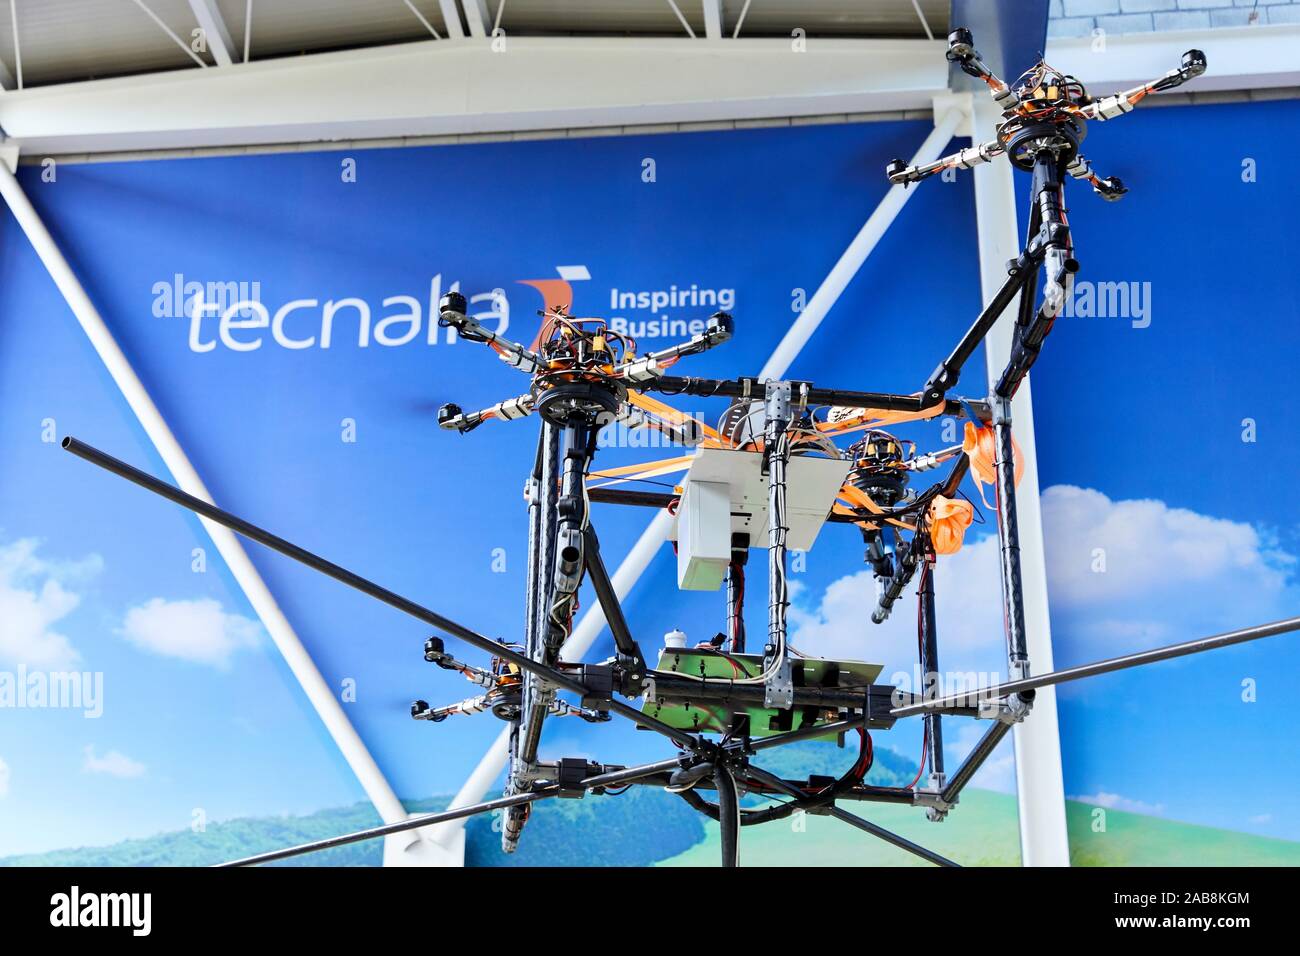 Drone research and development, Codisava project, Advanced distributed control for safety and energy efficiency of air transport, Aerospace Industry, Stock Photo